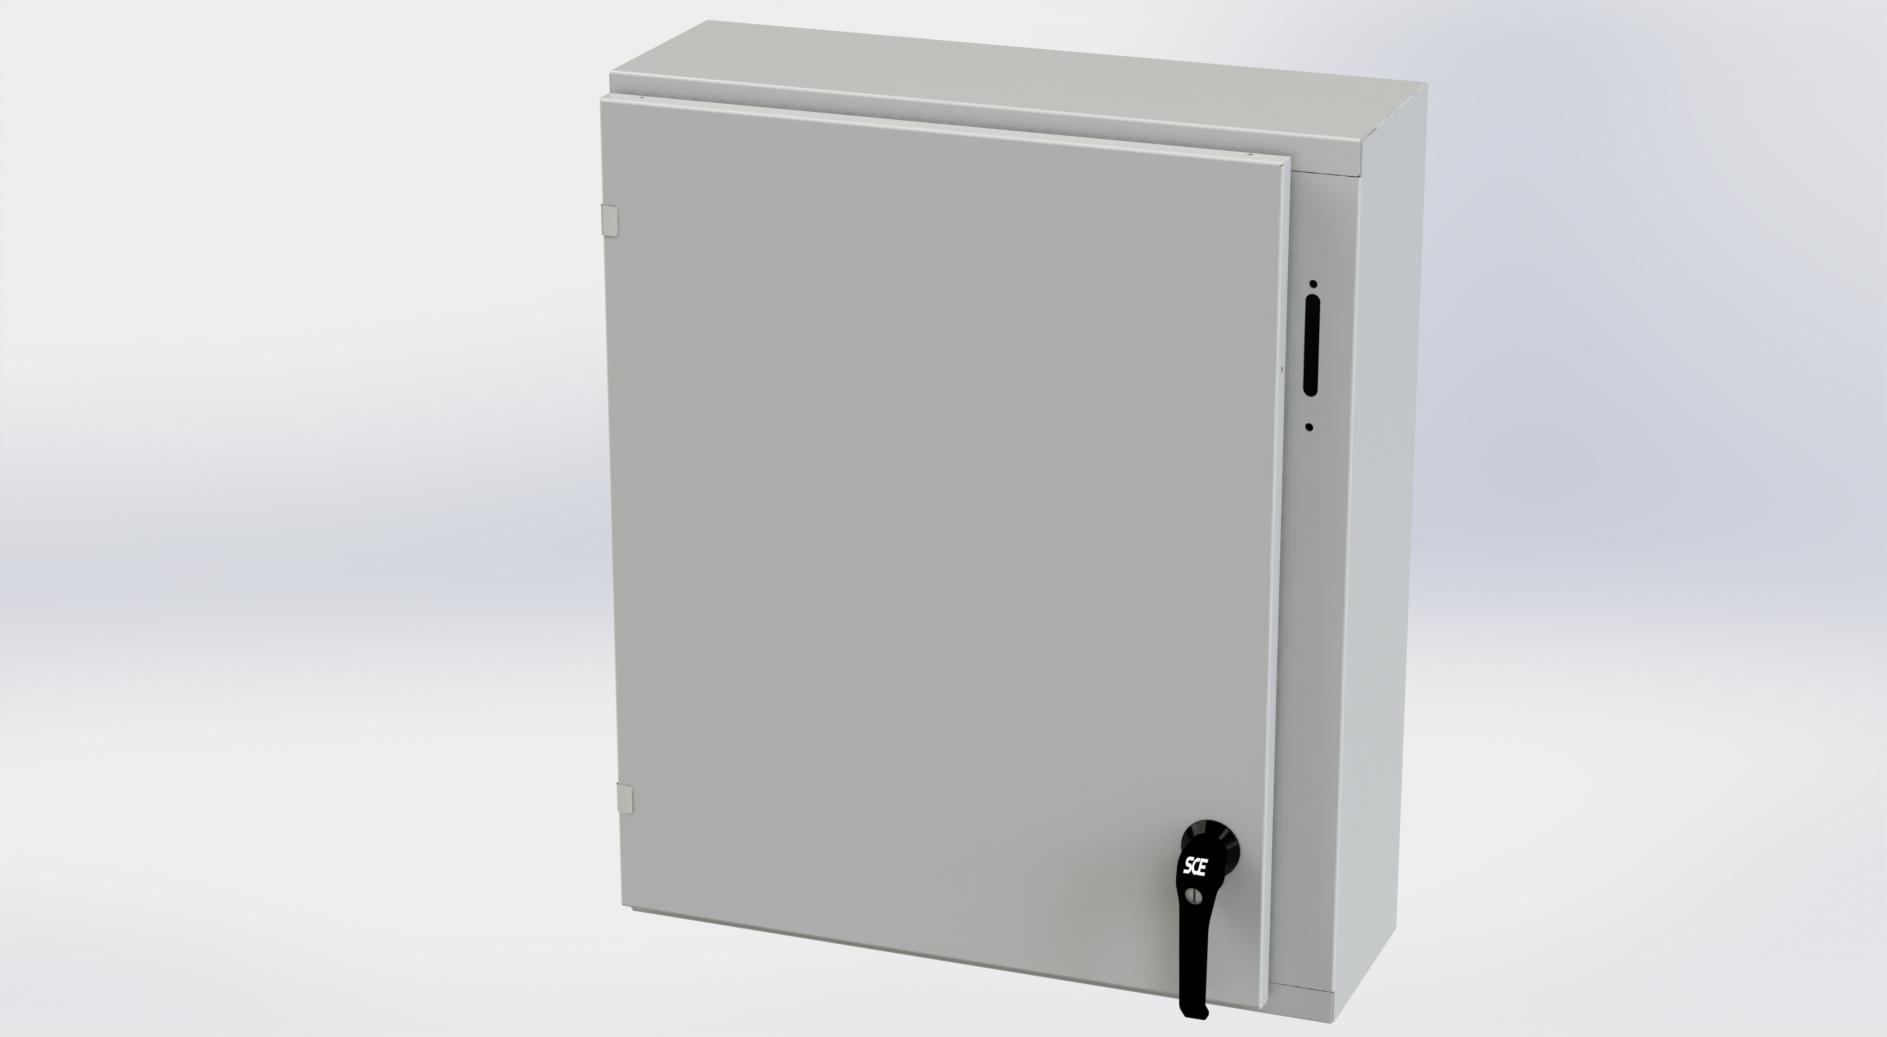 Saginaw Control SCE-30XEL2508LPLG XEL LP Enclosure, Height:30.00", Width:25.38", Depth:8.00", RAL 7035 gray powder coating inside and out. Optional sub-panels are powder coated white.